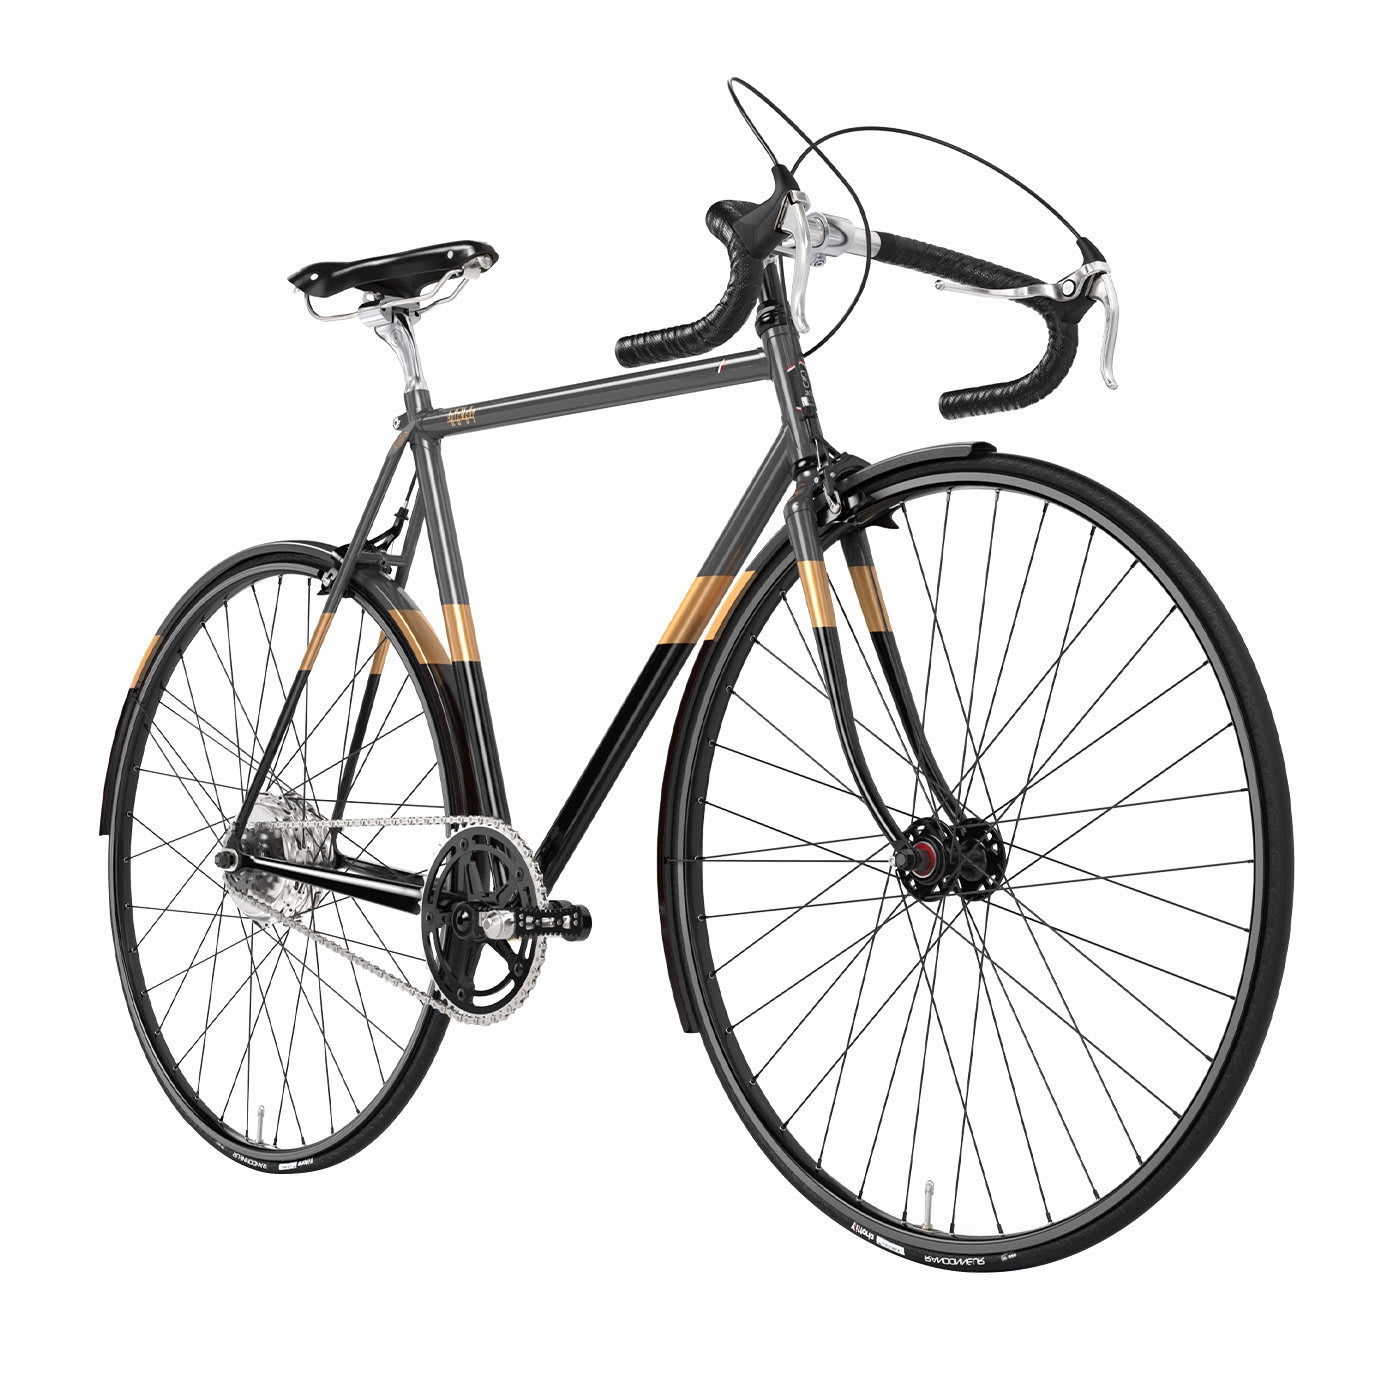 Roadster Pedal Assist Bicycle - Scatto Italiano